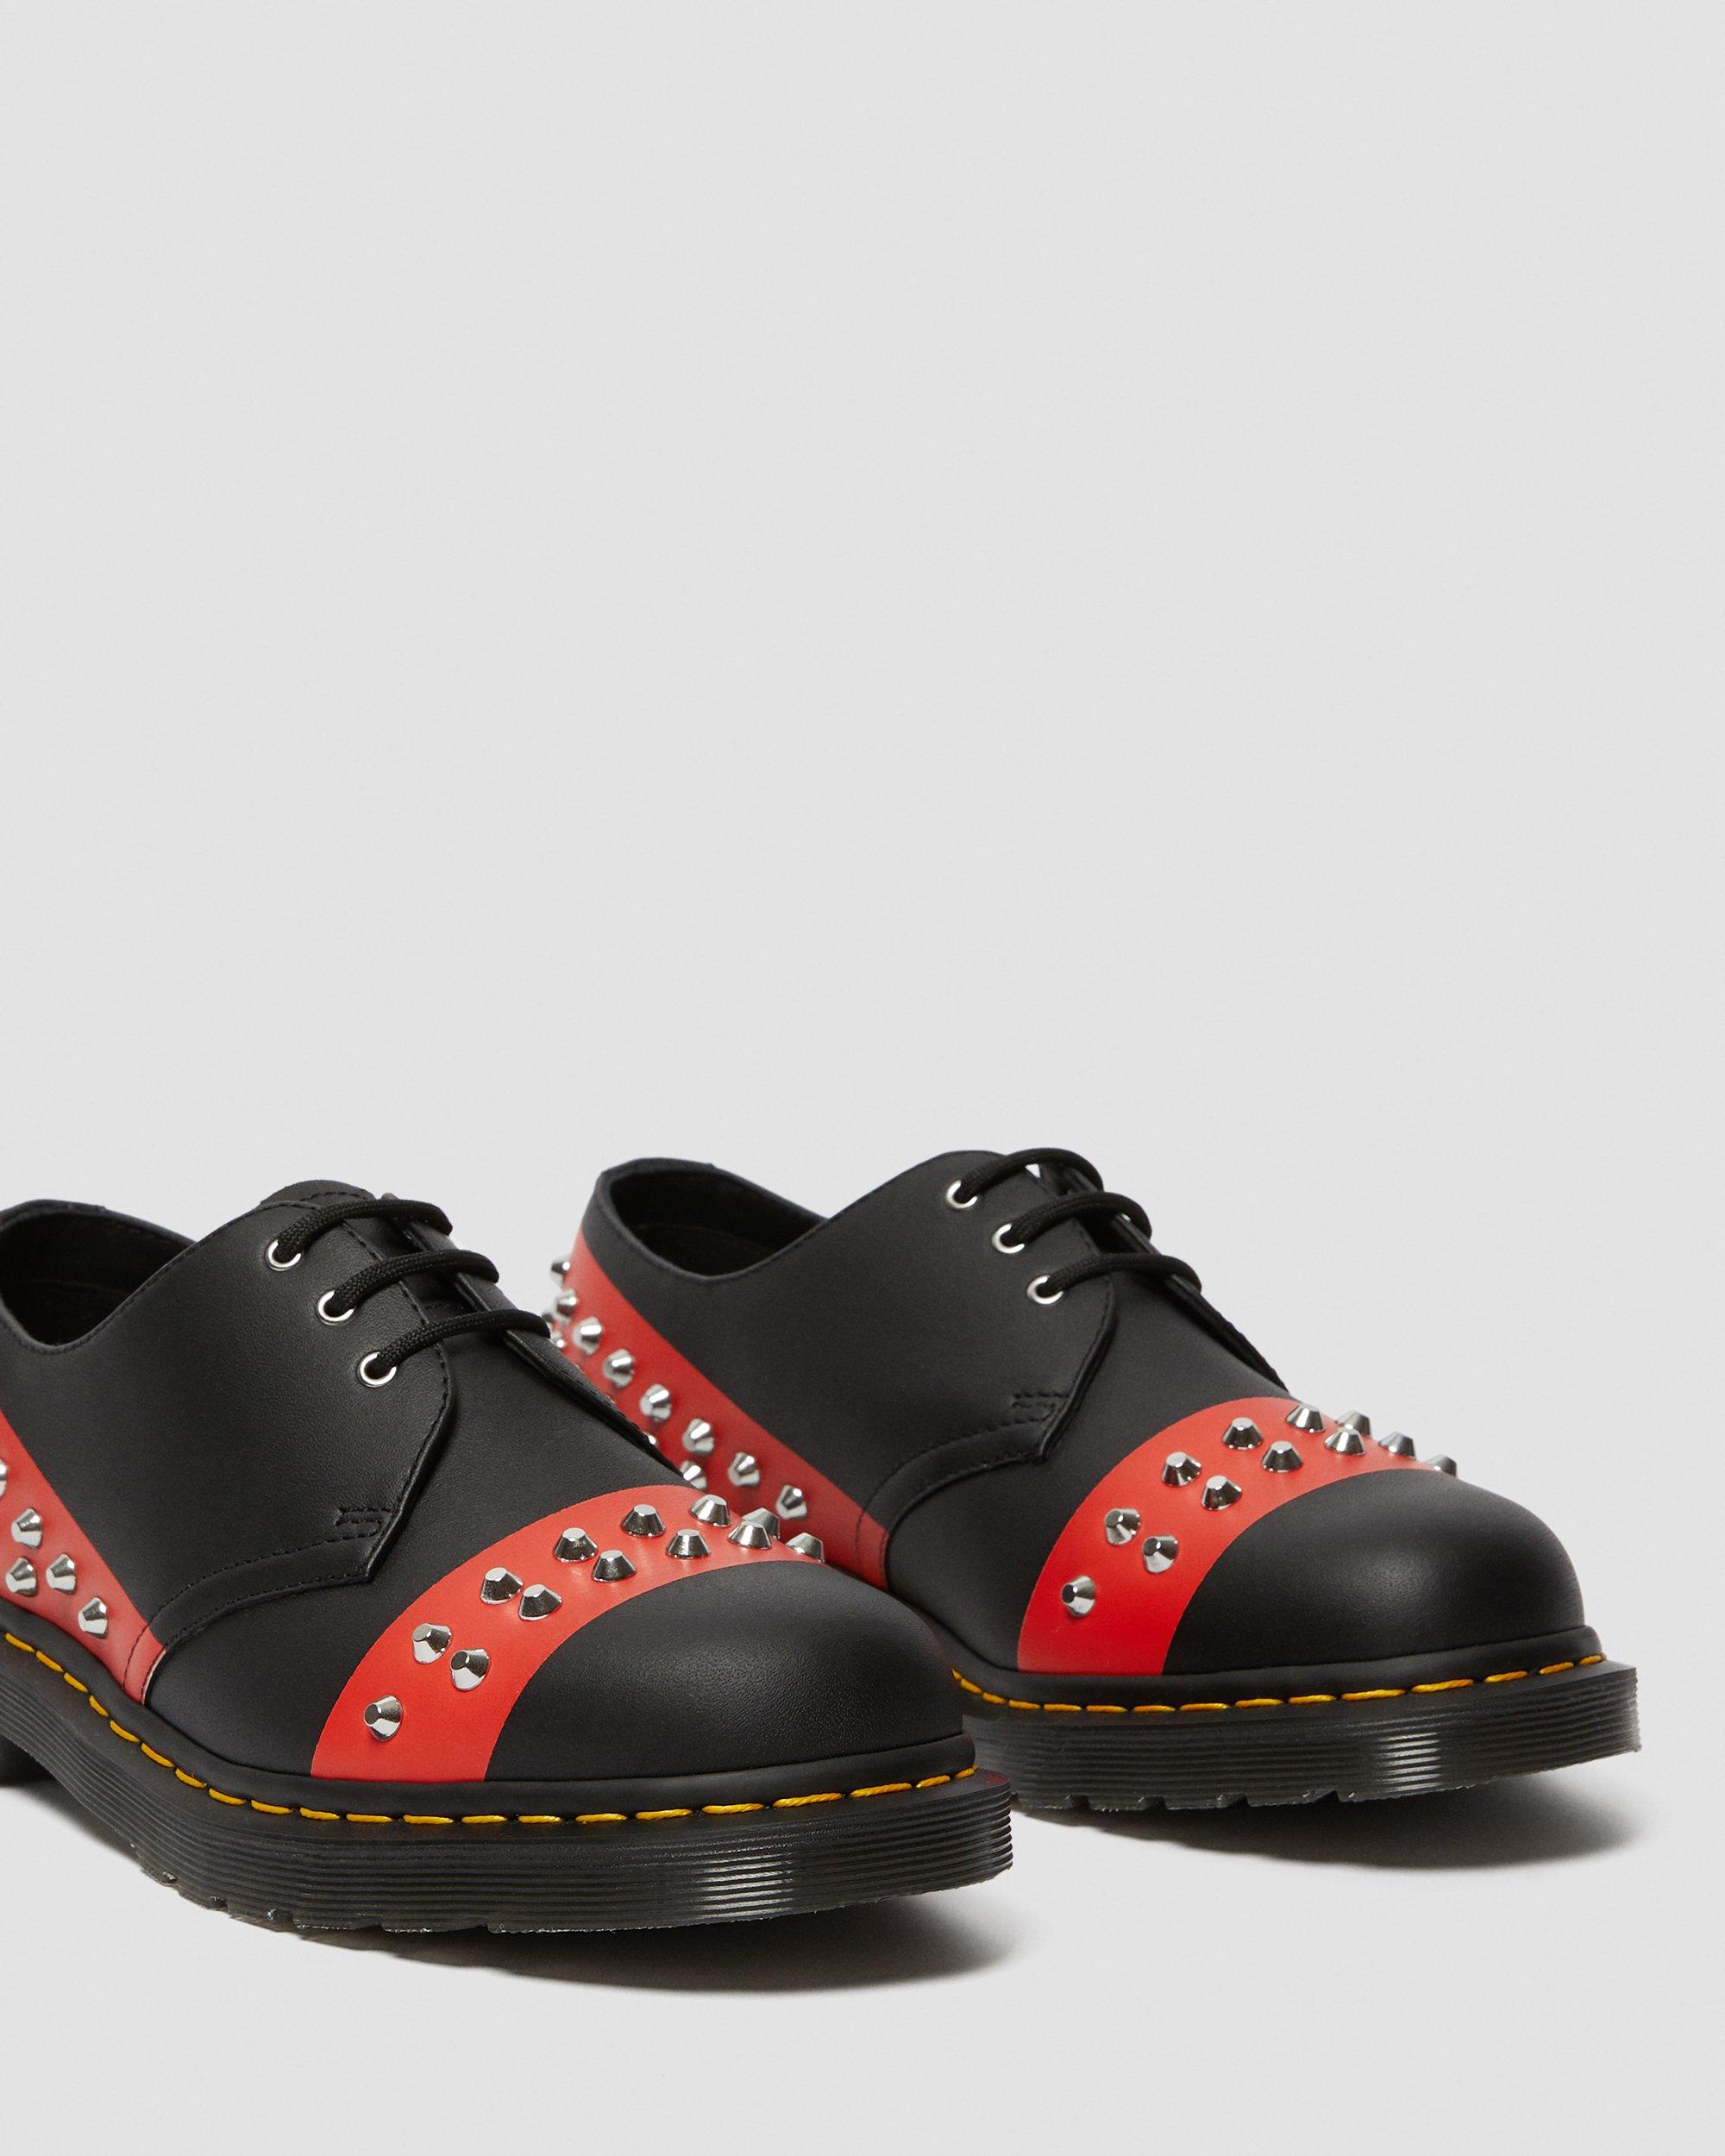 DR MARTENS 1461 Leather Studded Oxford Shoes